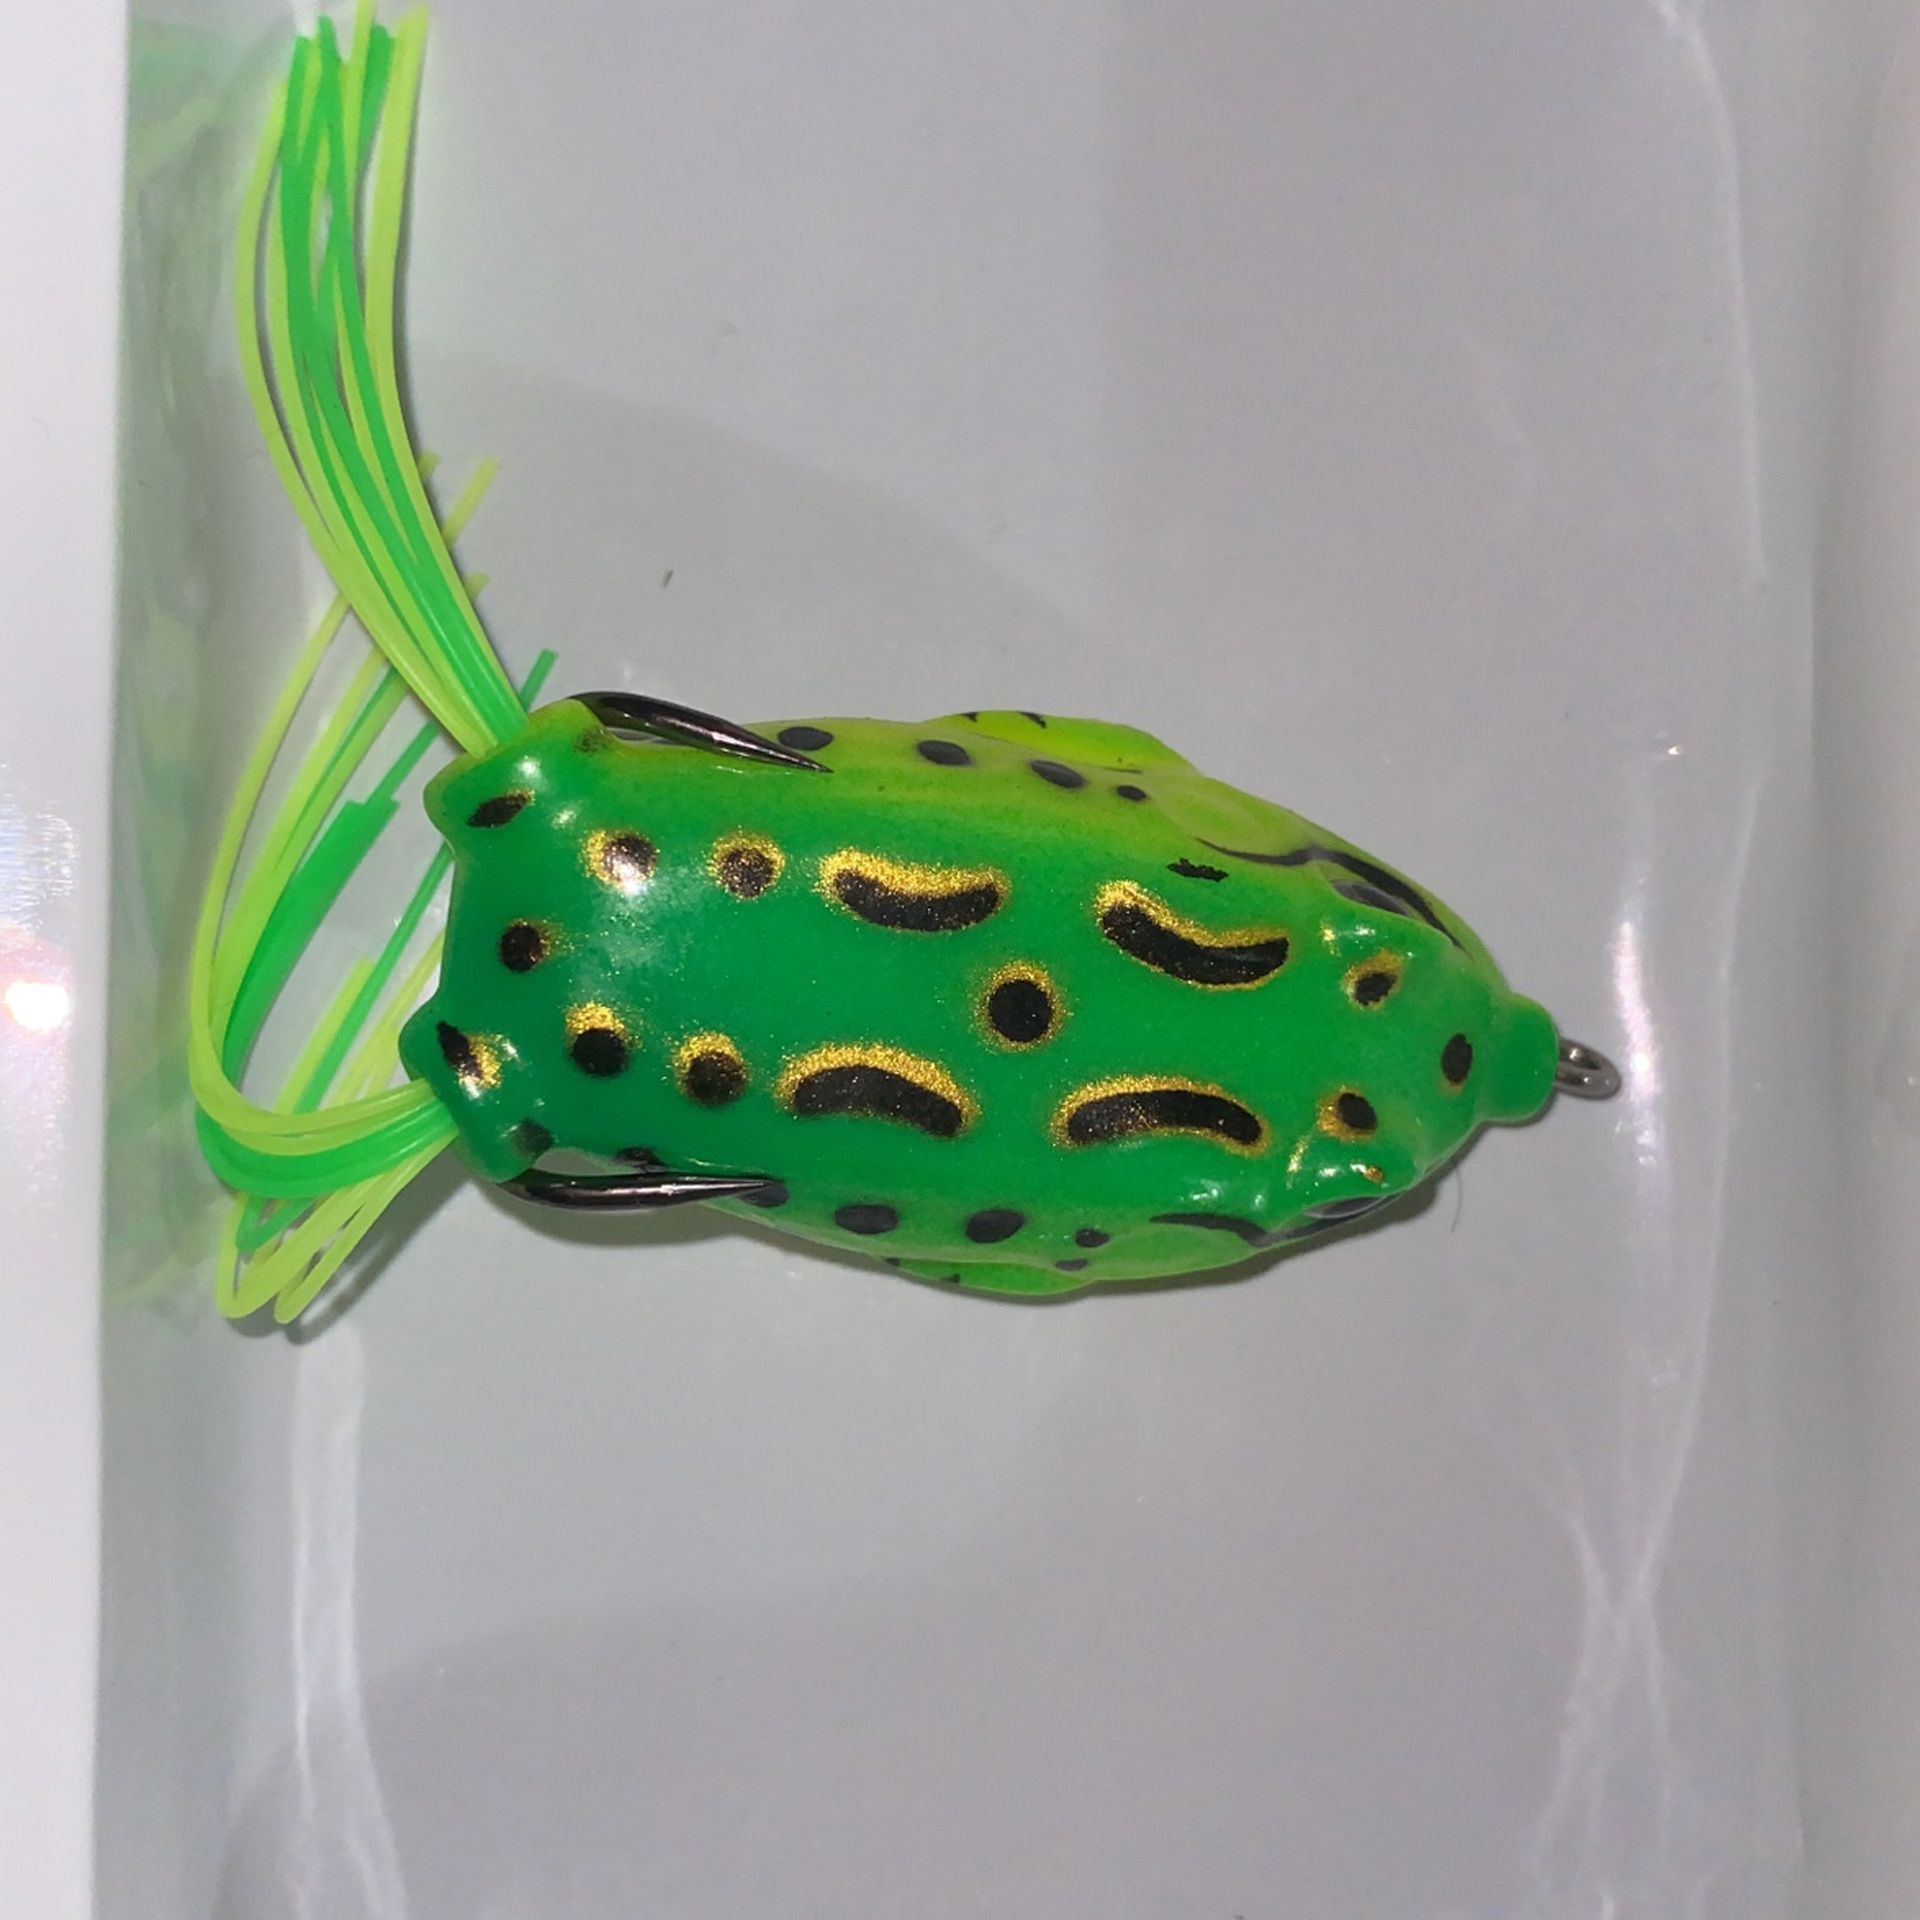 HomeMade Frog Lure for Sale in Evansville, IN - OfferUp